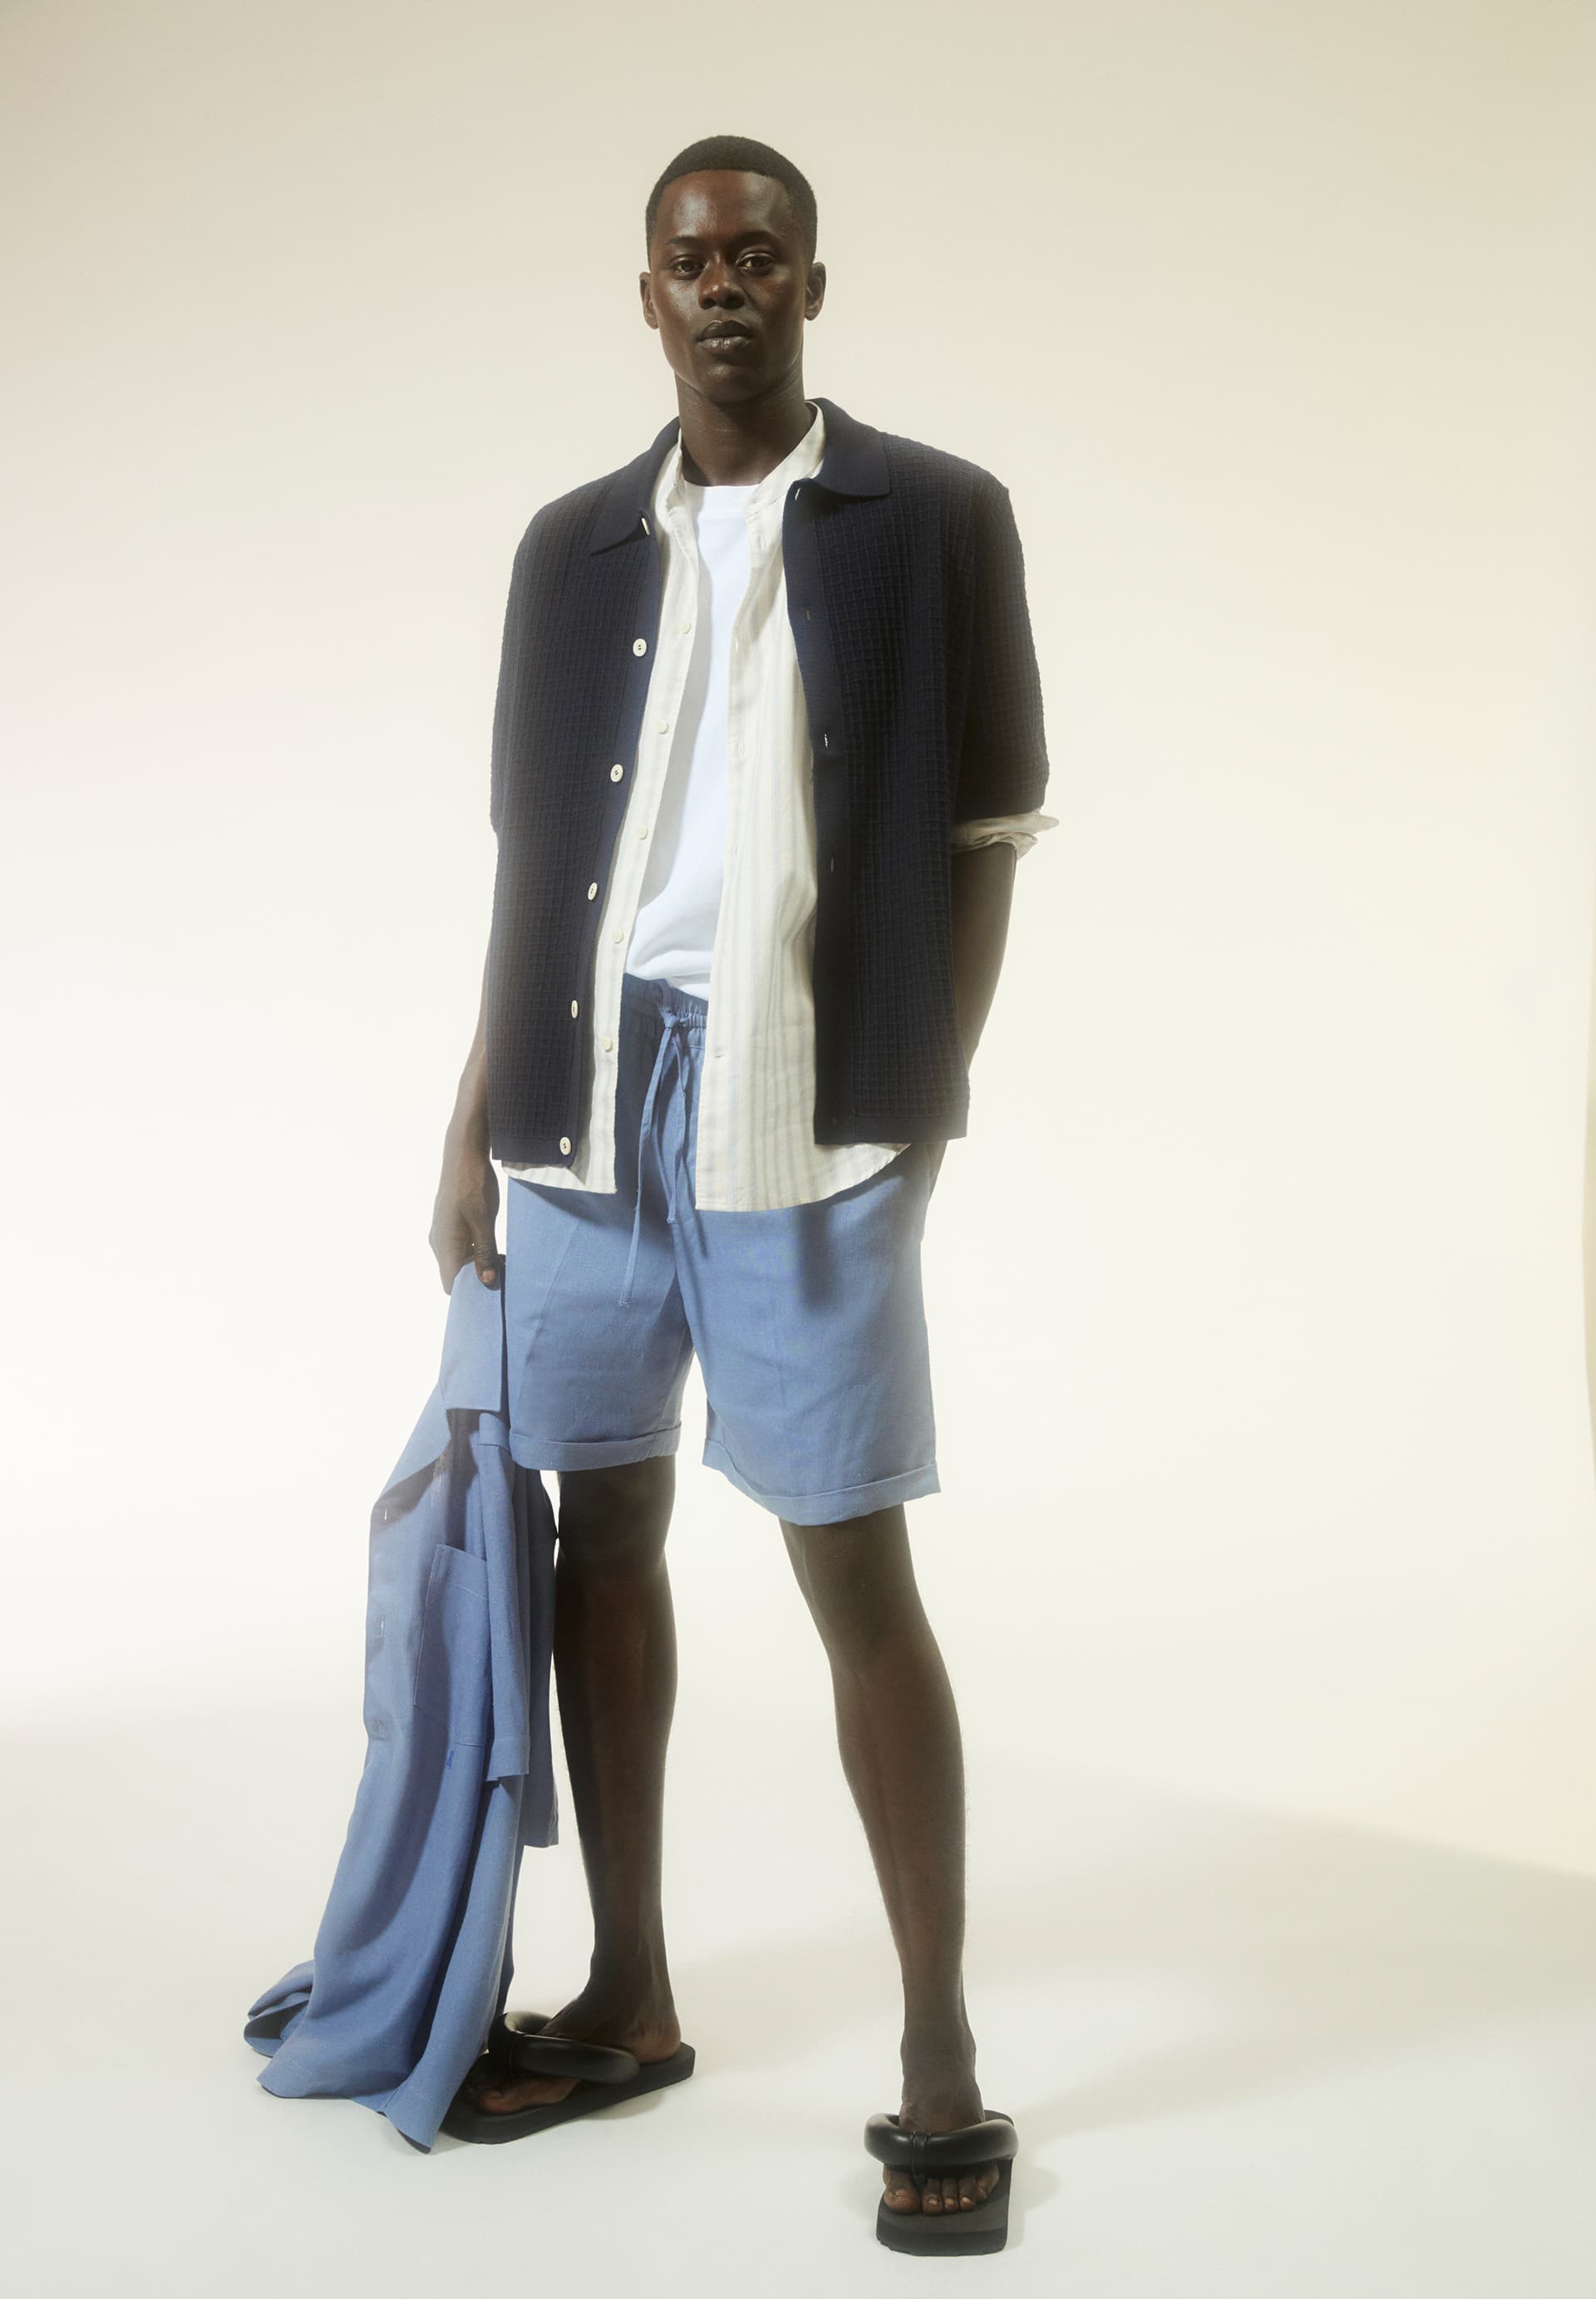 JAACQUE Shorts made of Linen-Mix